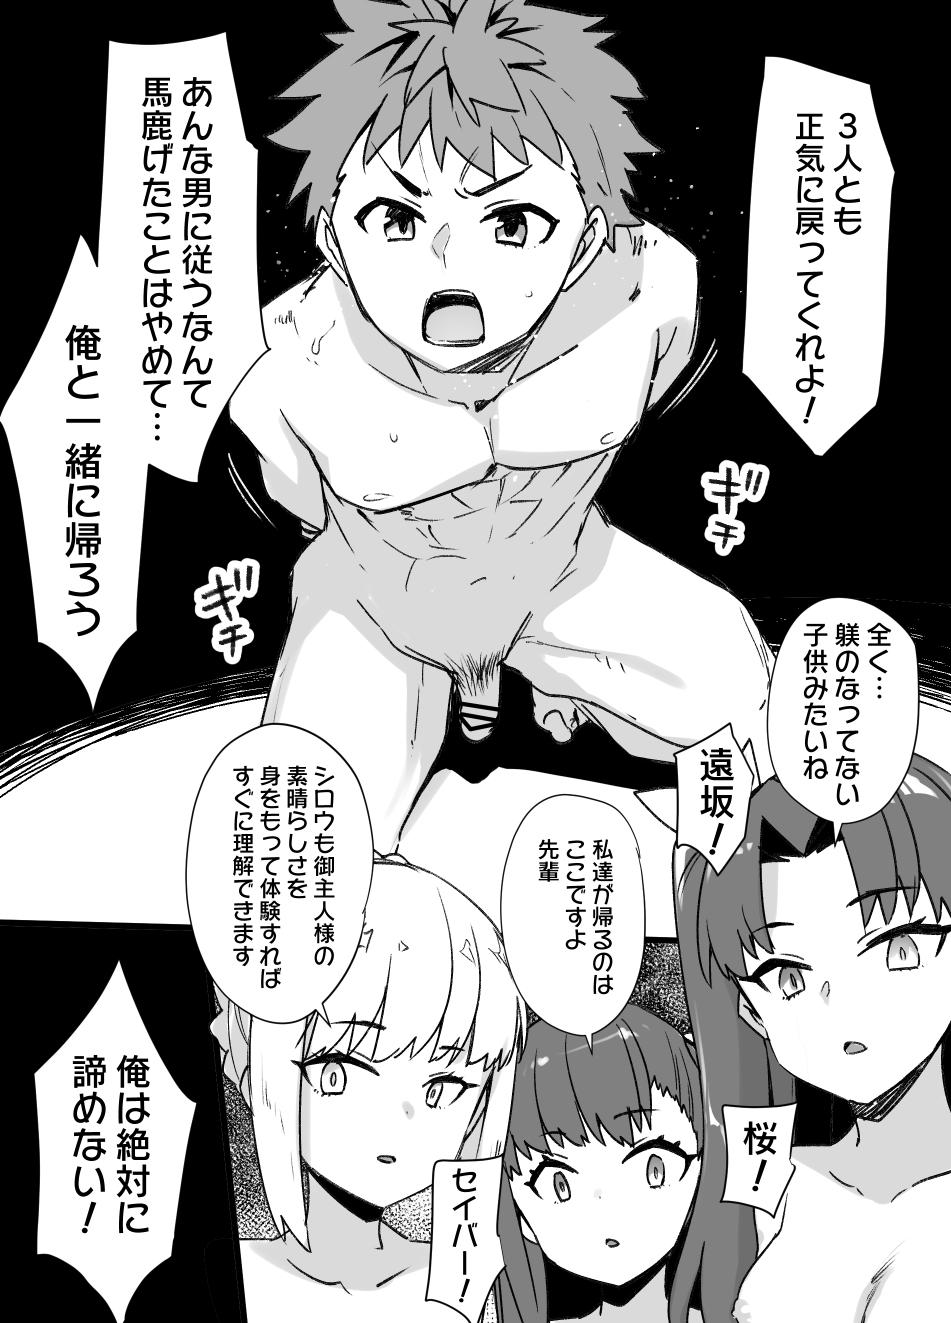 Celebrity Porn A manga about Shirou Emiya who went to save Rin Tohsaka from captivity and is transformed into a female slave through physical feminization and brainwashing[Fate/ stay night) - Fate stay night Fucked Hard - Page 7